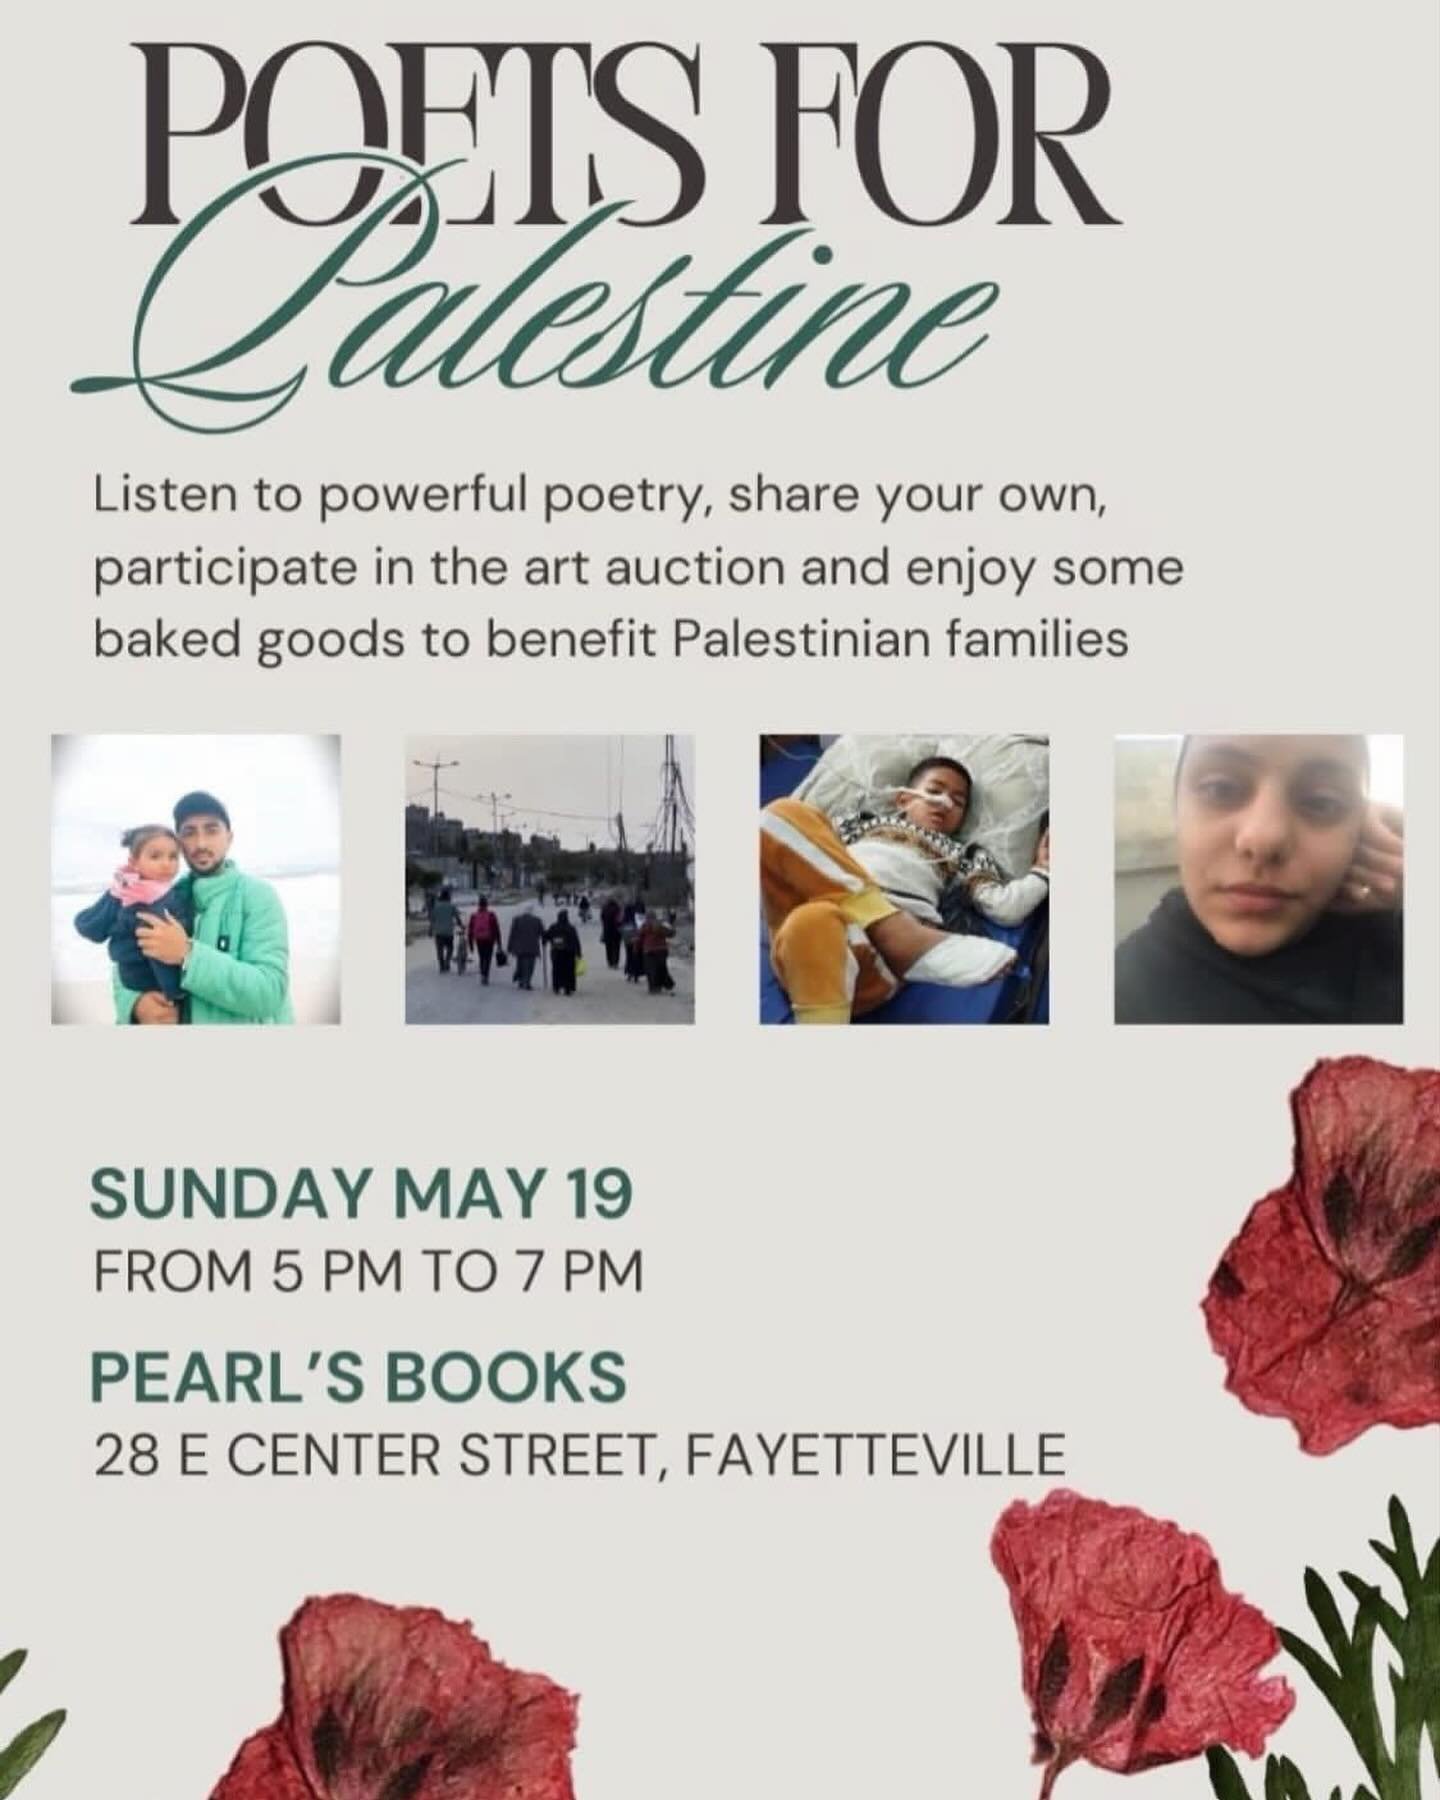 Hey Artist Friends! Friends of Palestine NWA is having a local art auction/poetry reading next Sunday in Fayetteville. If you would like to donate prints or other artwork to this event to benefit three Palestinian families, DM me and I&rsquo;ll share